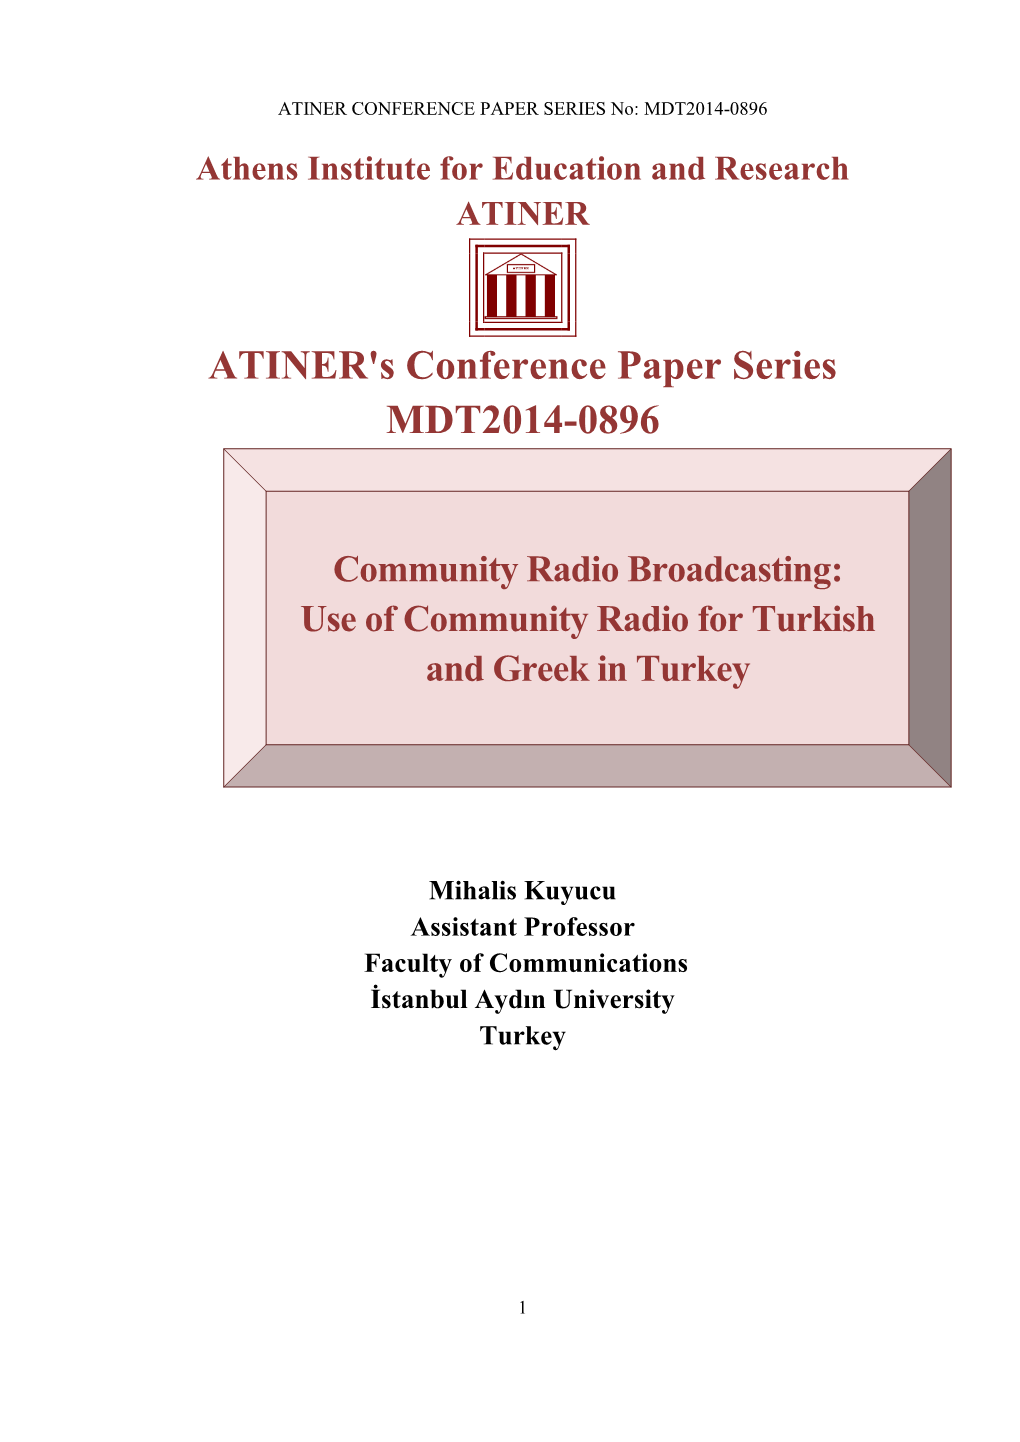 ATINER's Conference Paper Series MDT2014-0896